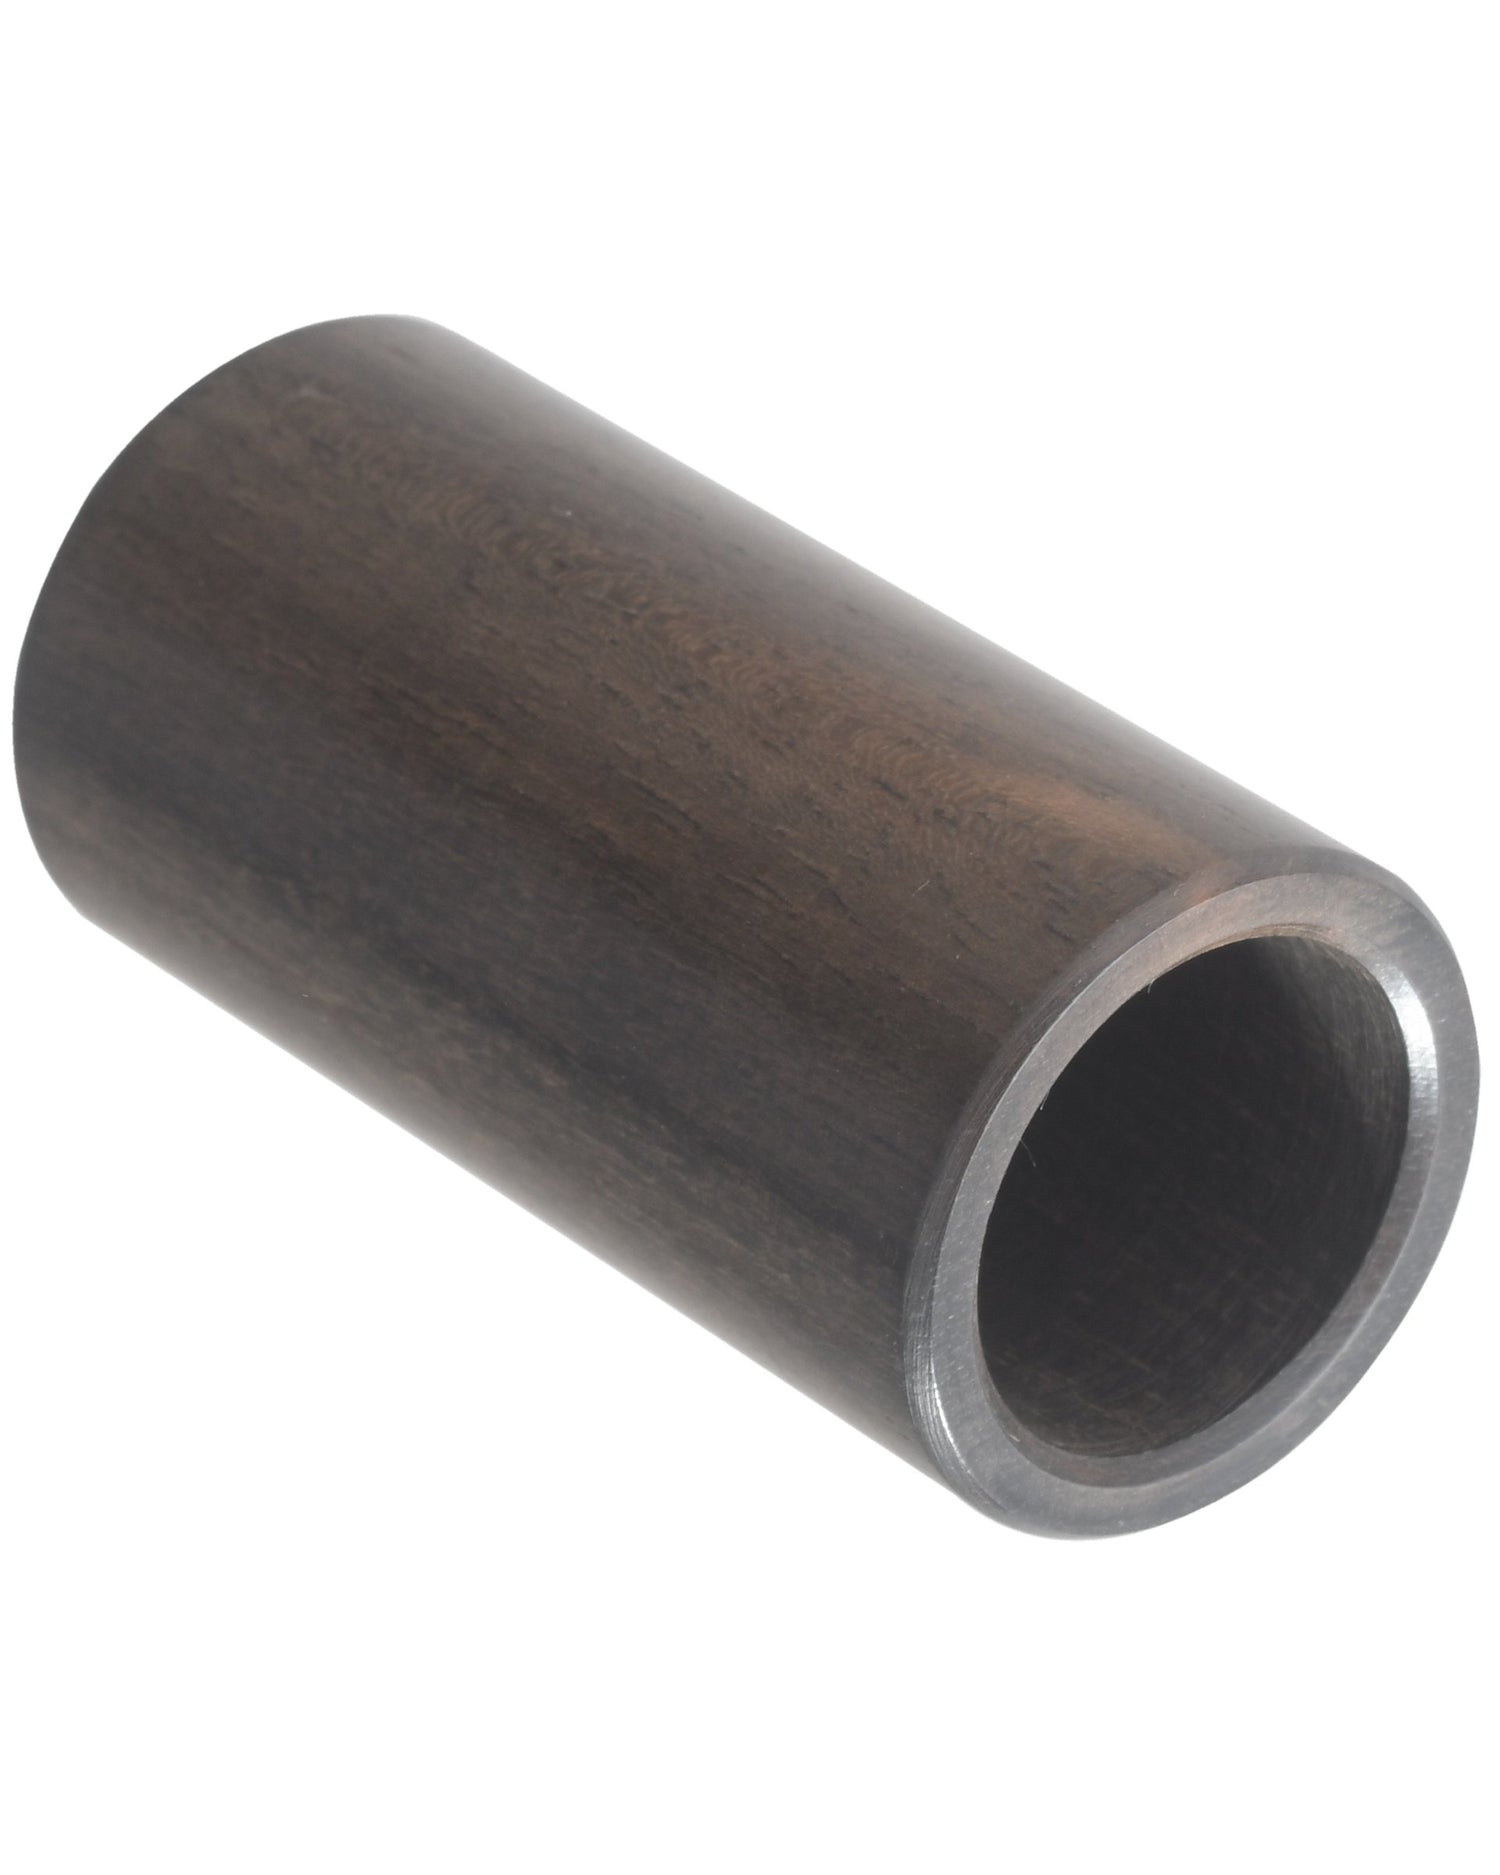 Image 1 of Taylor Ebony Guitar Slide, Extra Large - SKU# TEGS-XL : Product Type Accessories & Parts : Elderly Instruments